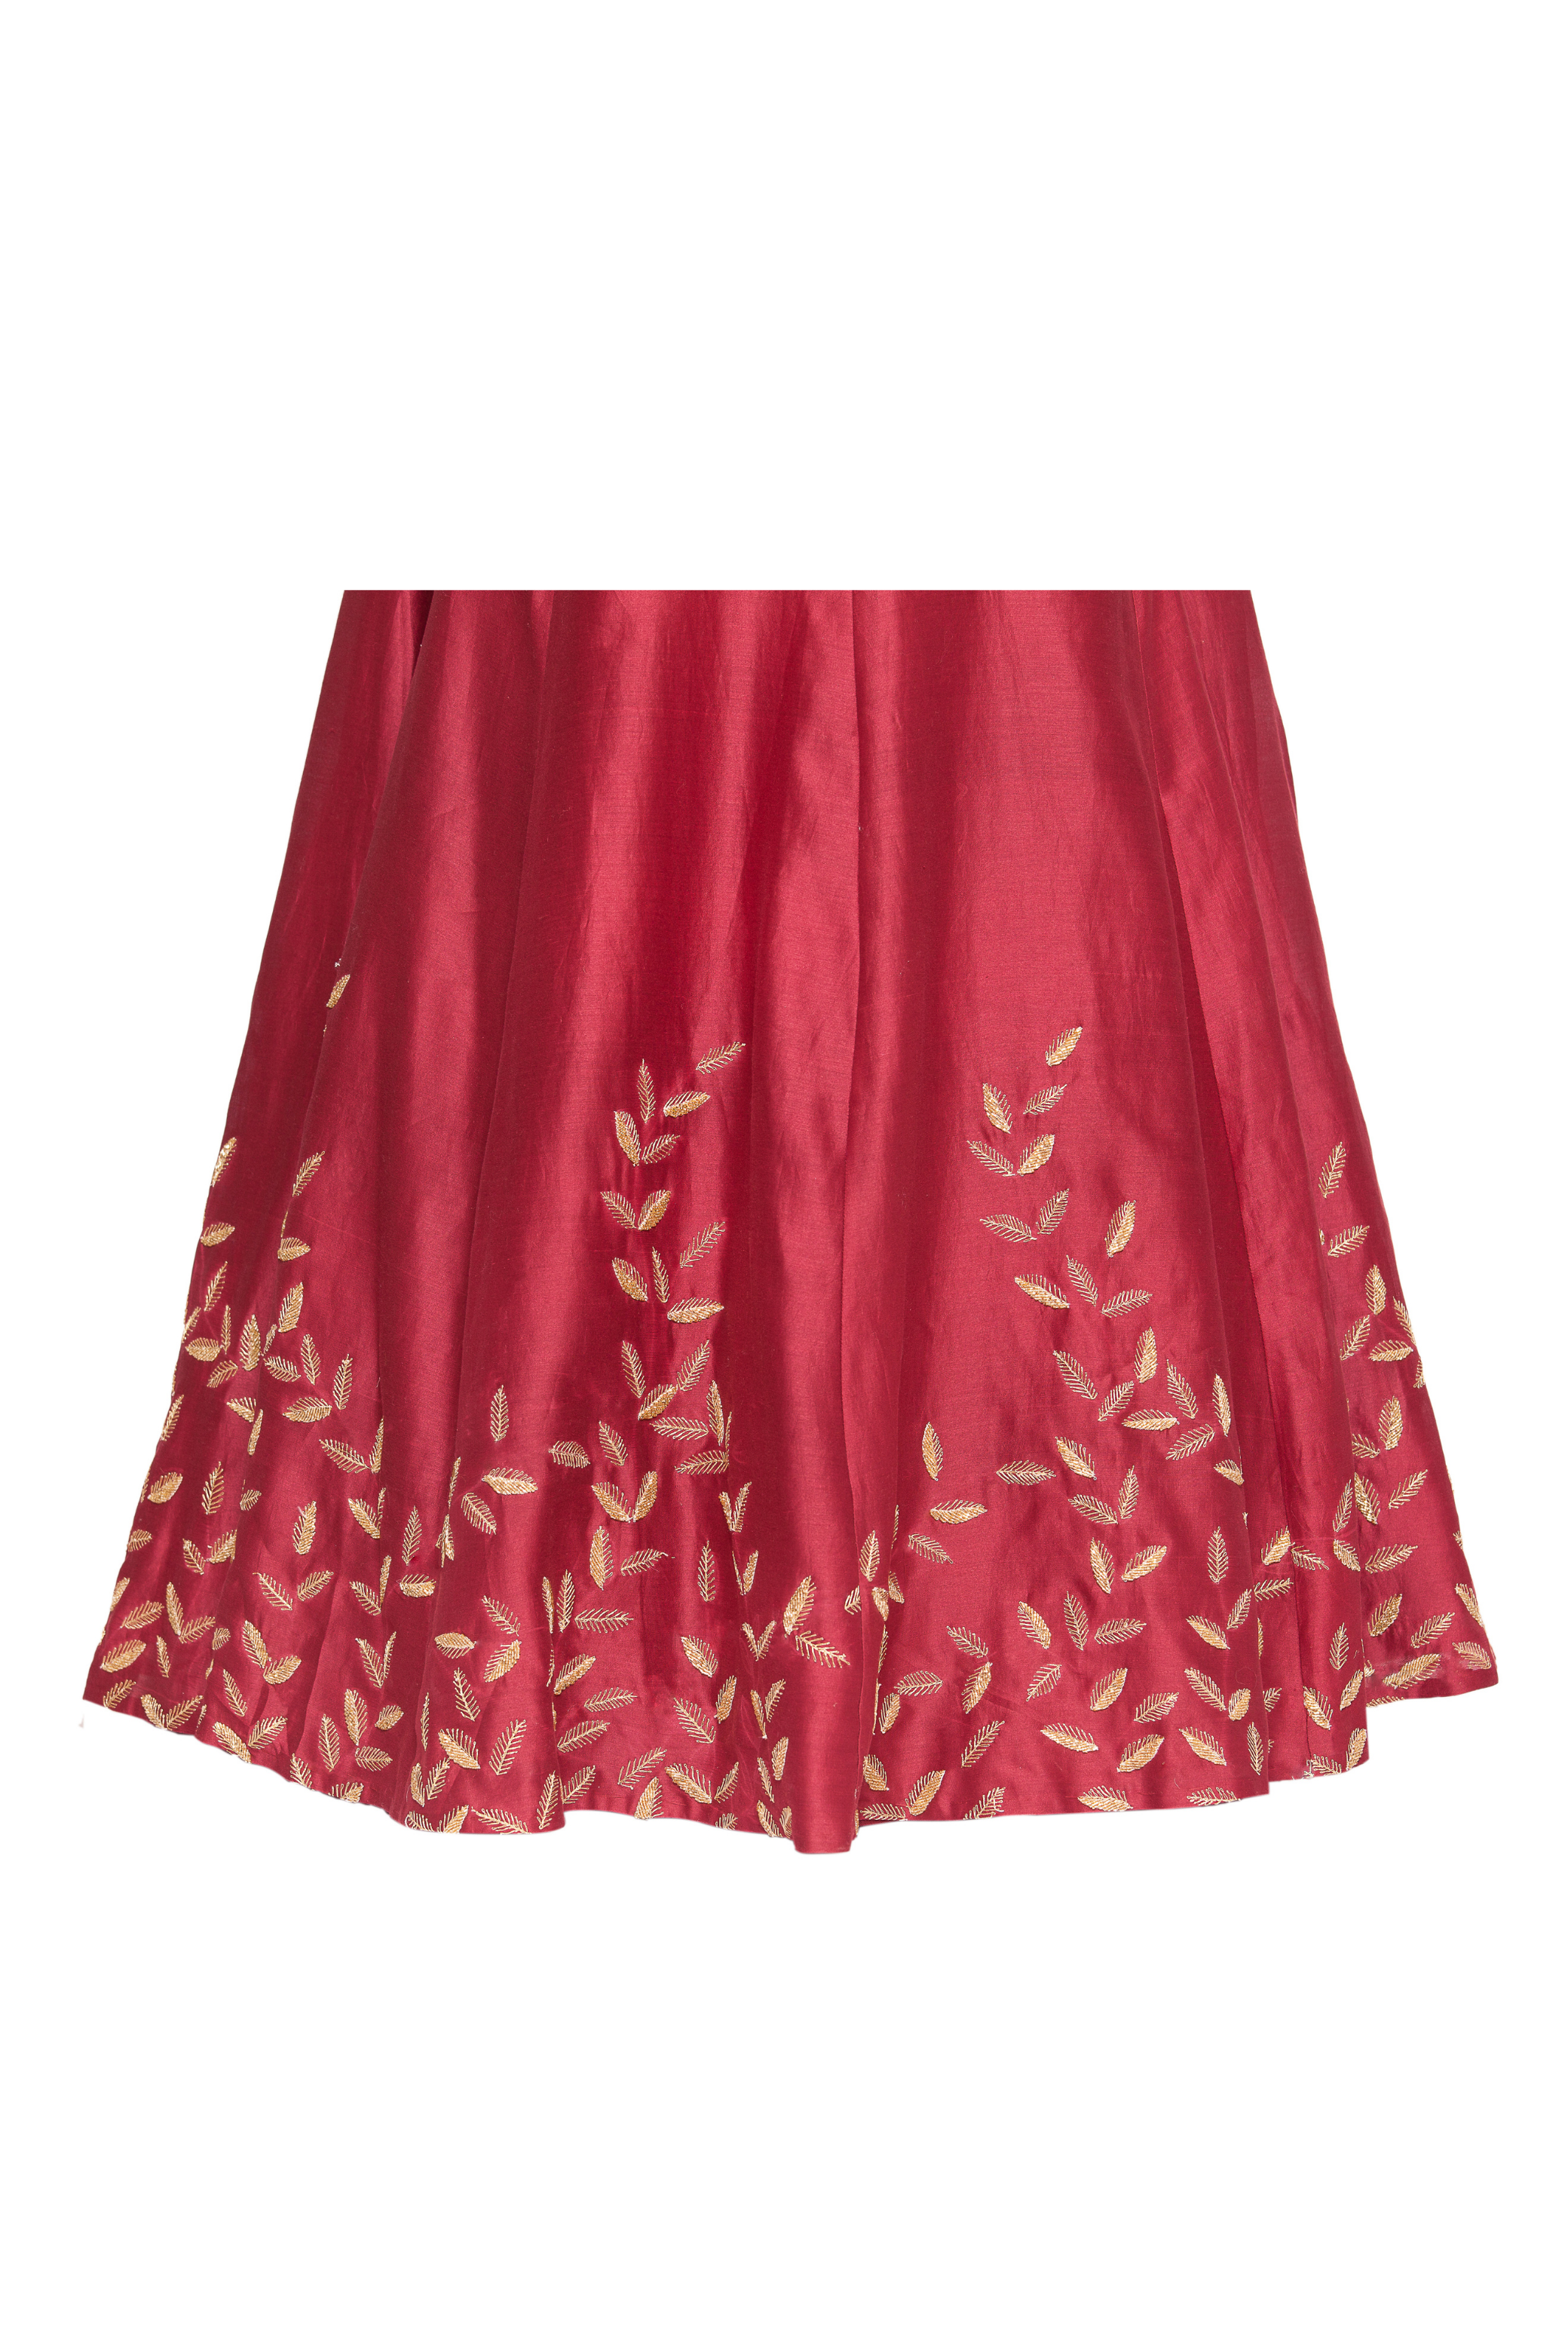 maroon skirt hand embroidered  in cut dana leaves